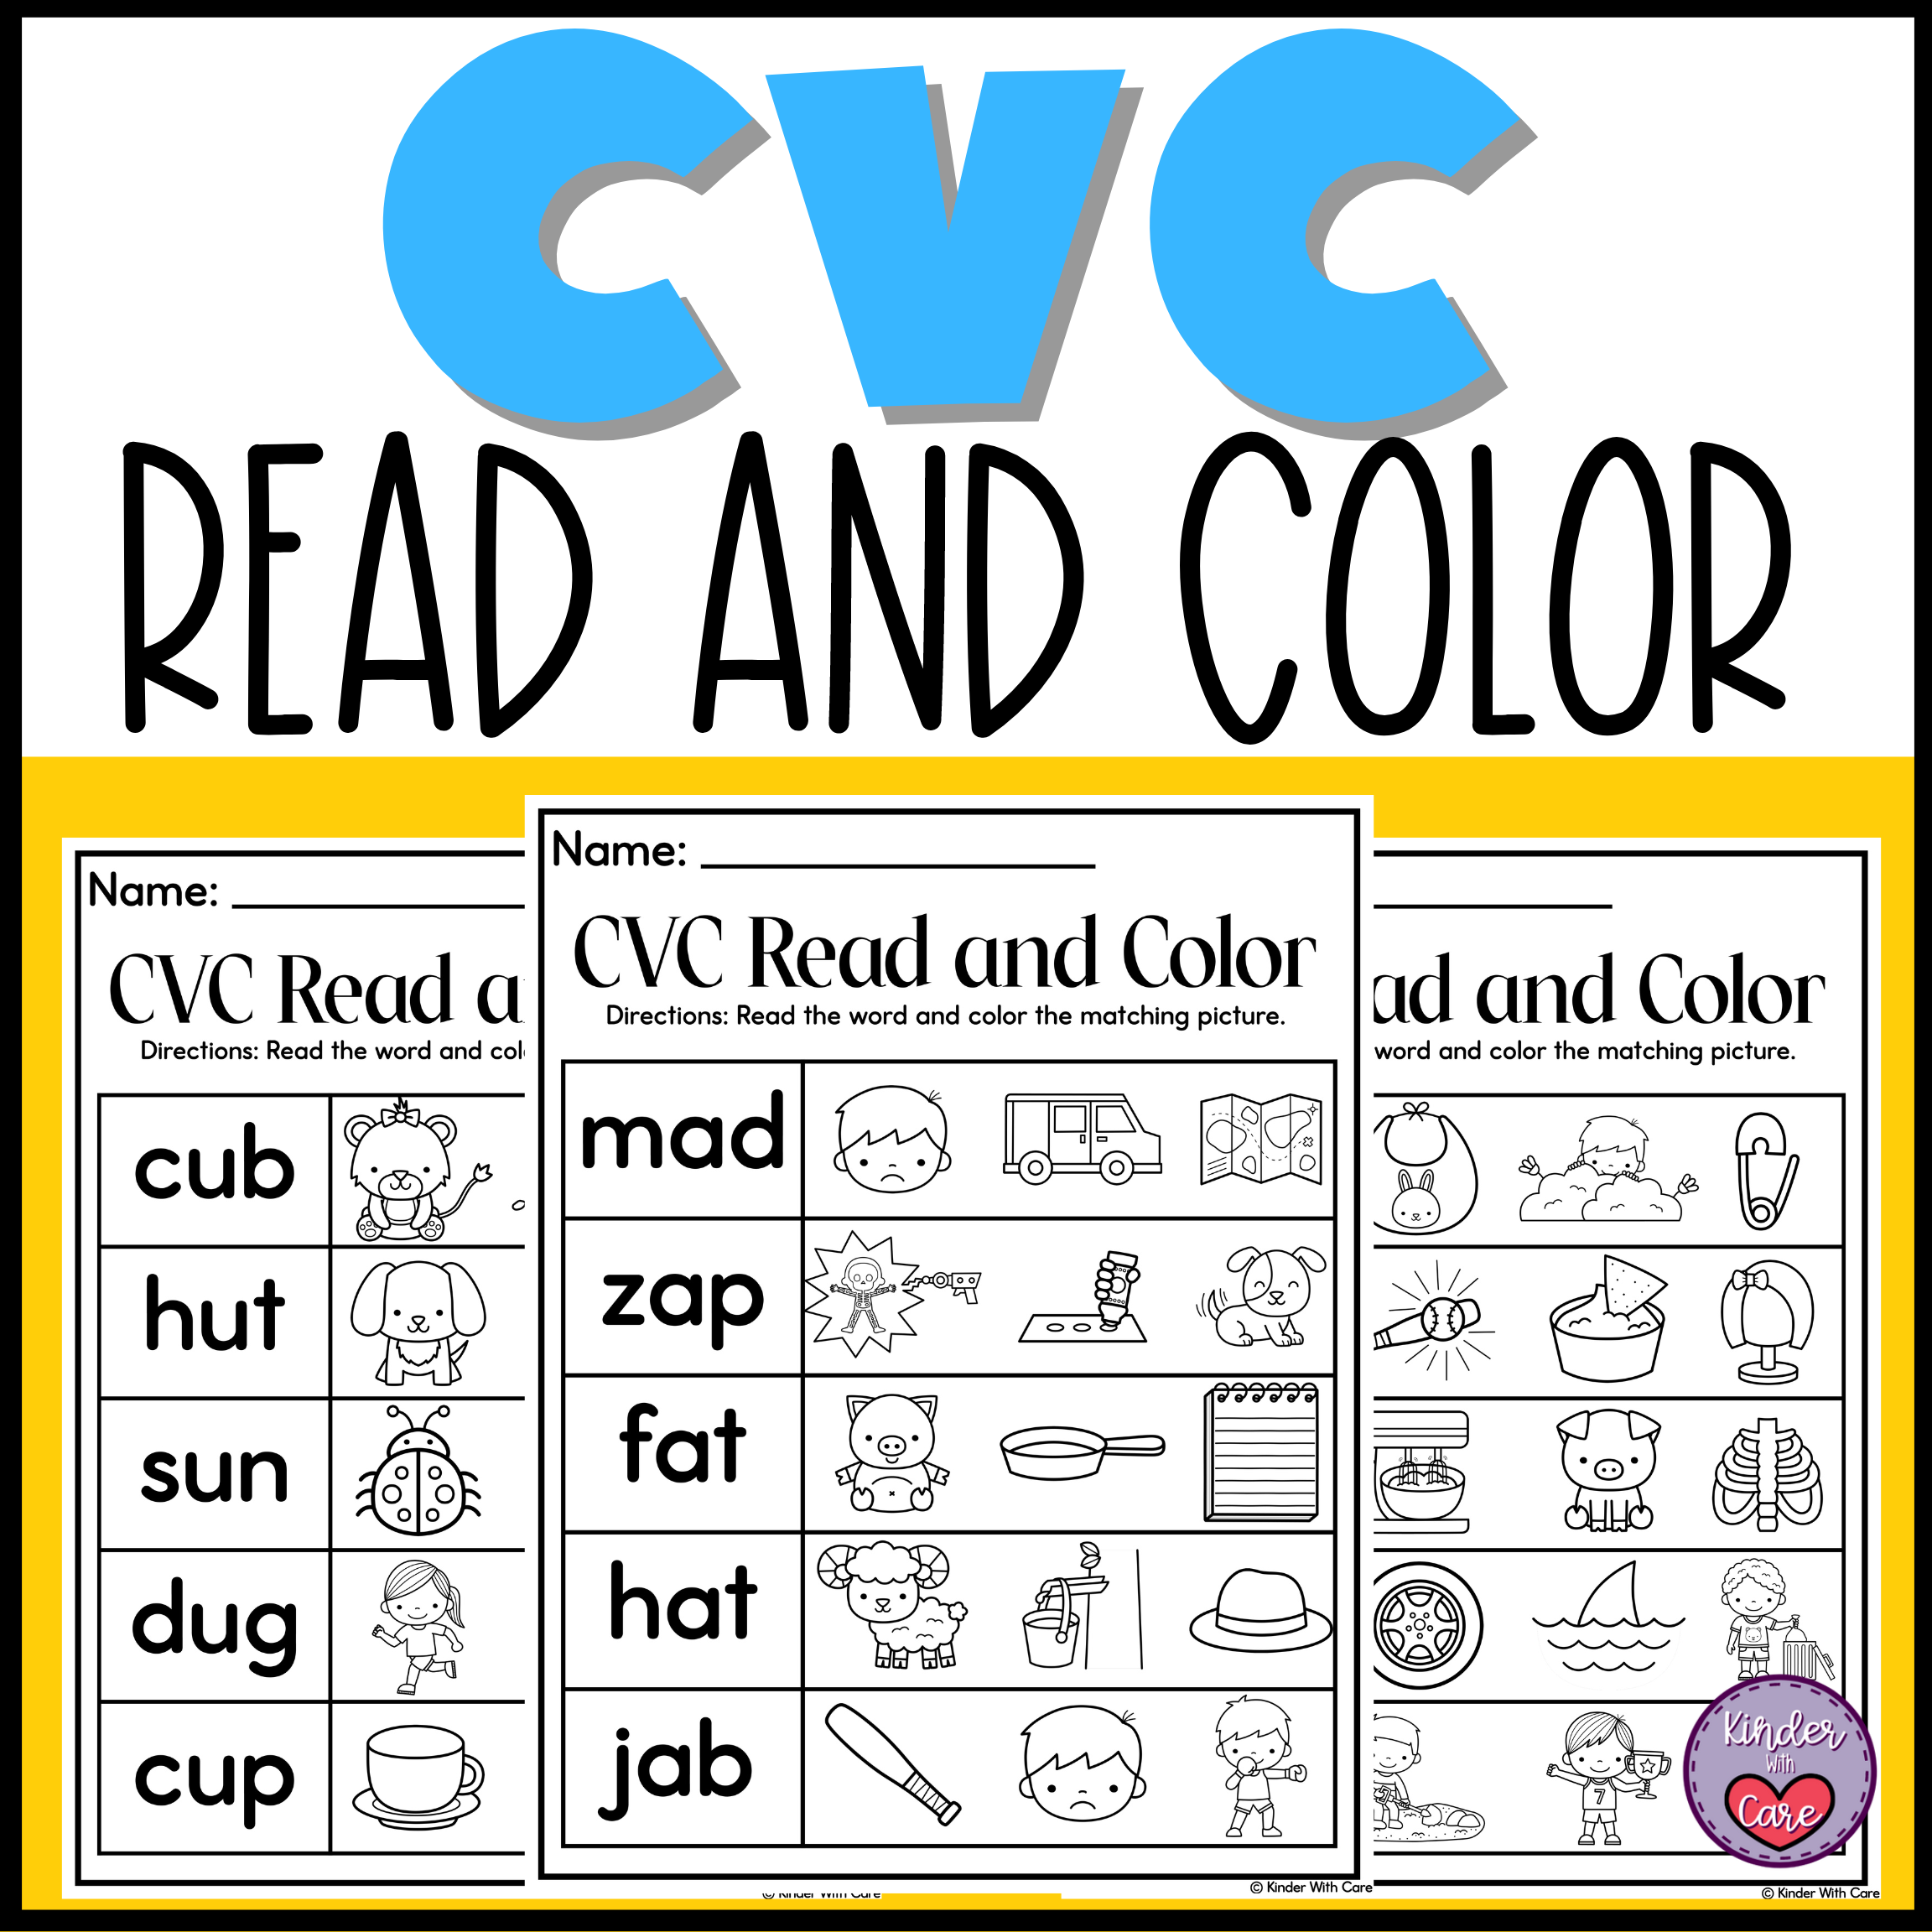 CVC Read and Color